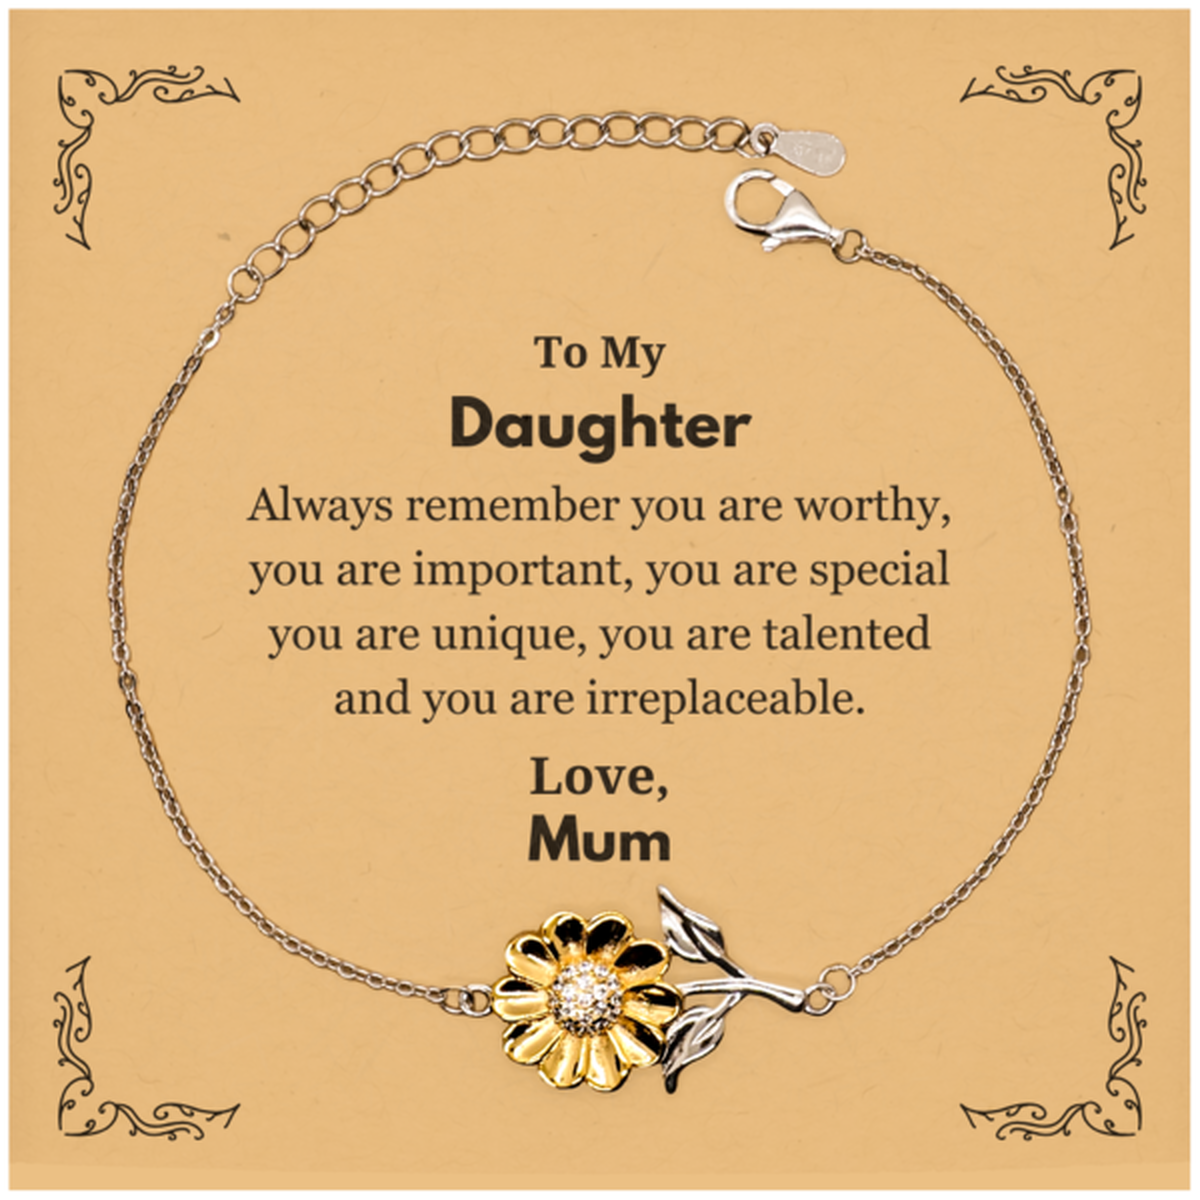 Daughter Birthday Gifts from Mum, Inspirational Sunflower Bracelet for Daughter Christmas Graduation Gifts for Daughter Always remember you are worthy, you are important. Love, Mum